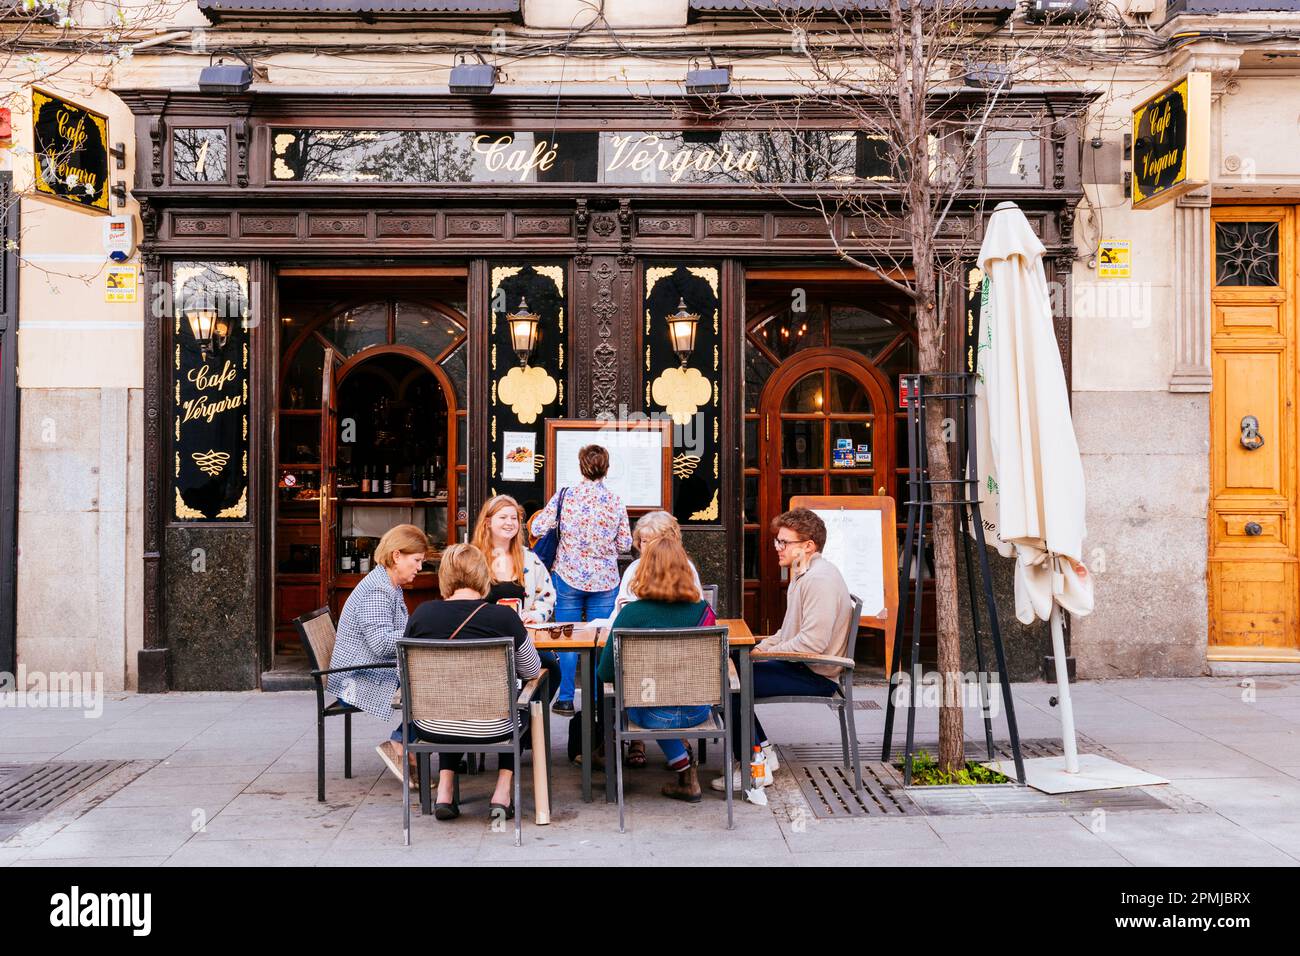 Traditional Tavern. People share a table on the terrace of the Café Vergara, Calle de Vergara. Madrid has an important gastronomic tradition. Many res Stock Photo